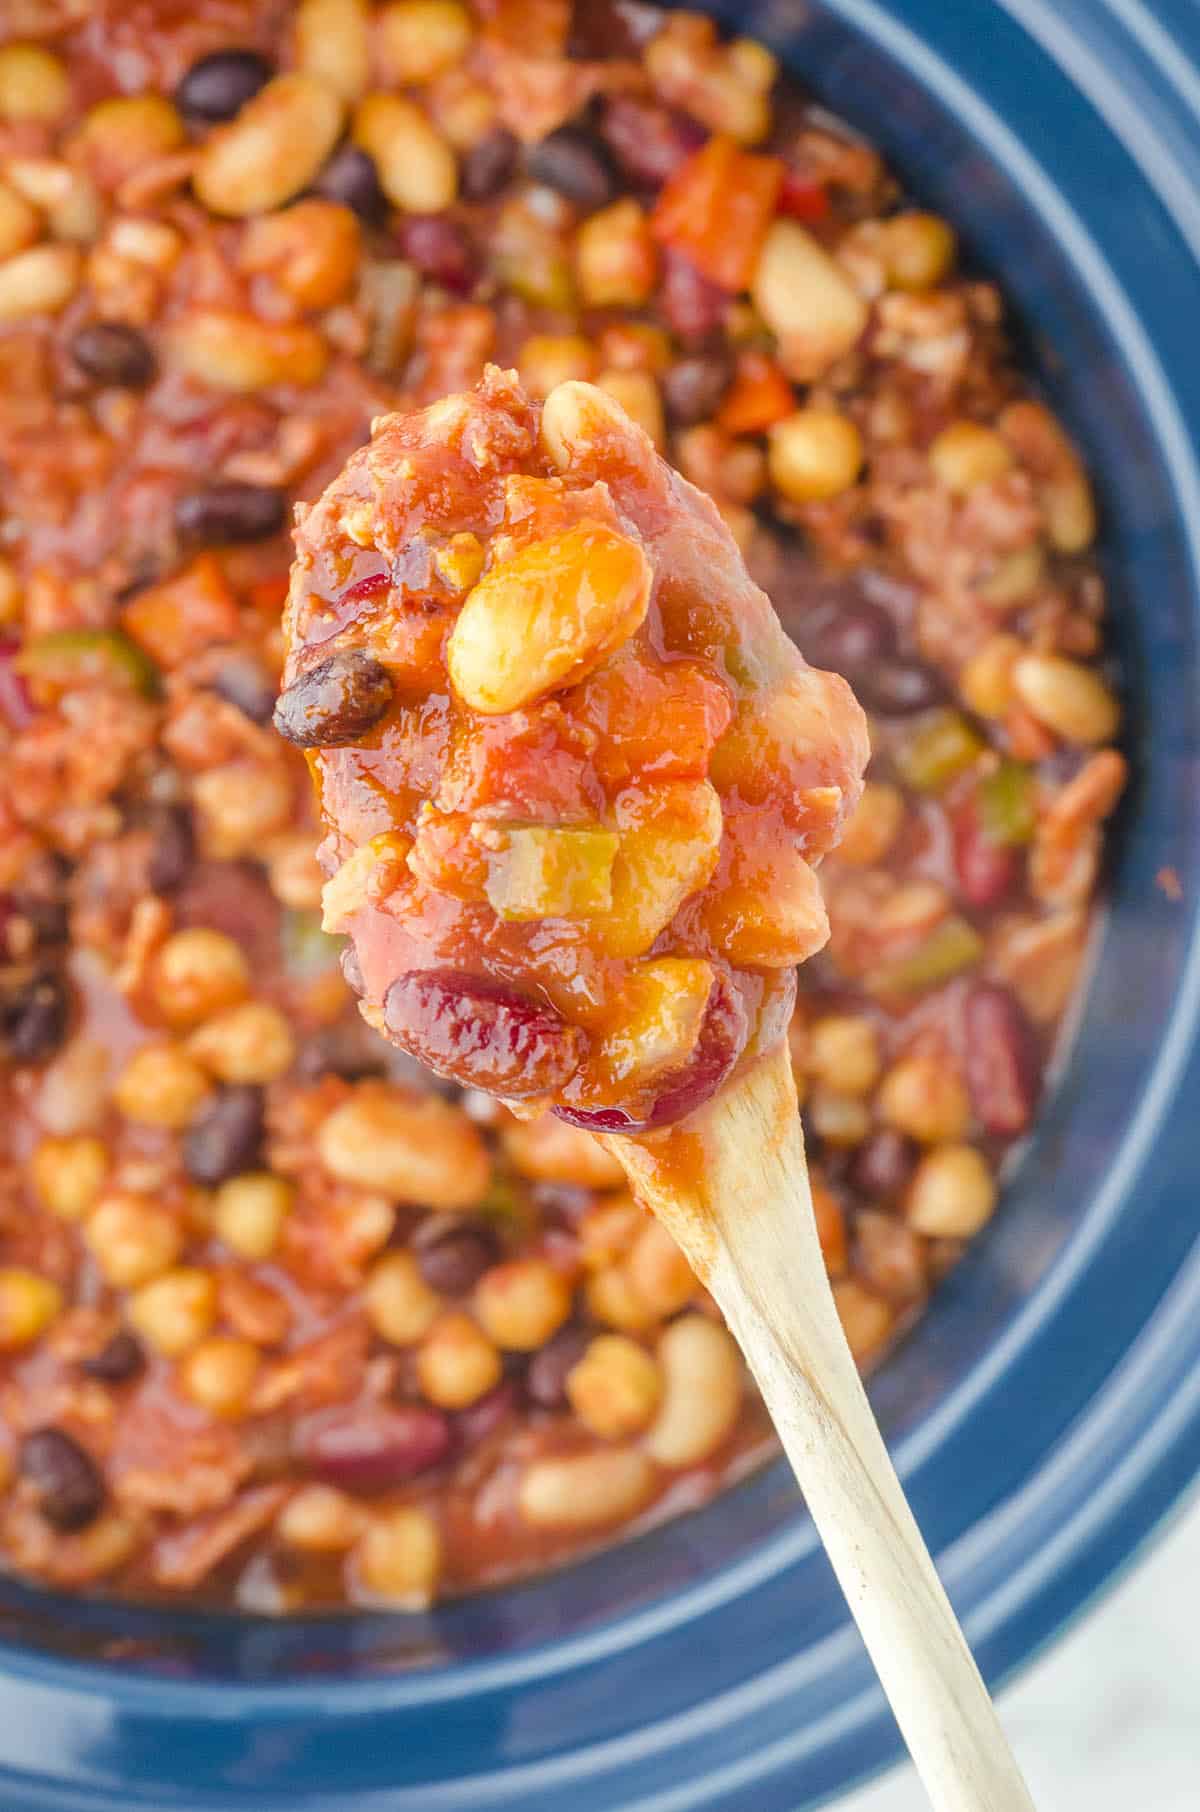 Loaded baked beans in a crockpot with a wood spoon grabbing a big scoop to serve them!